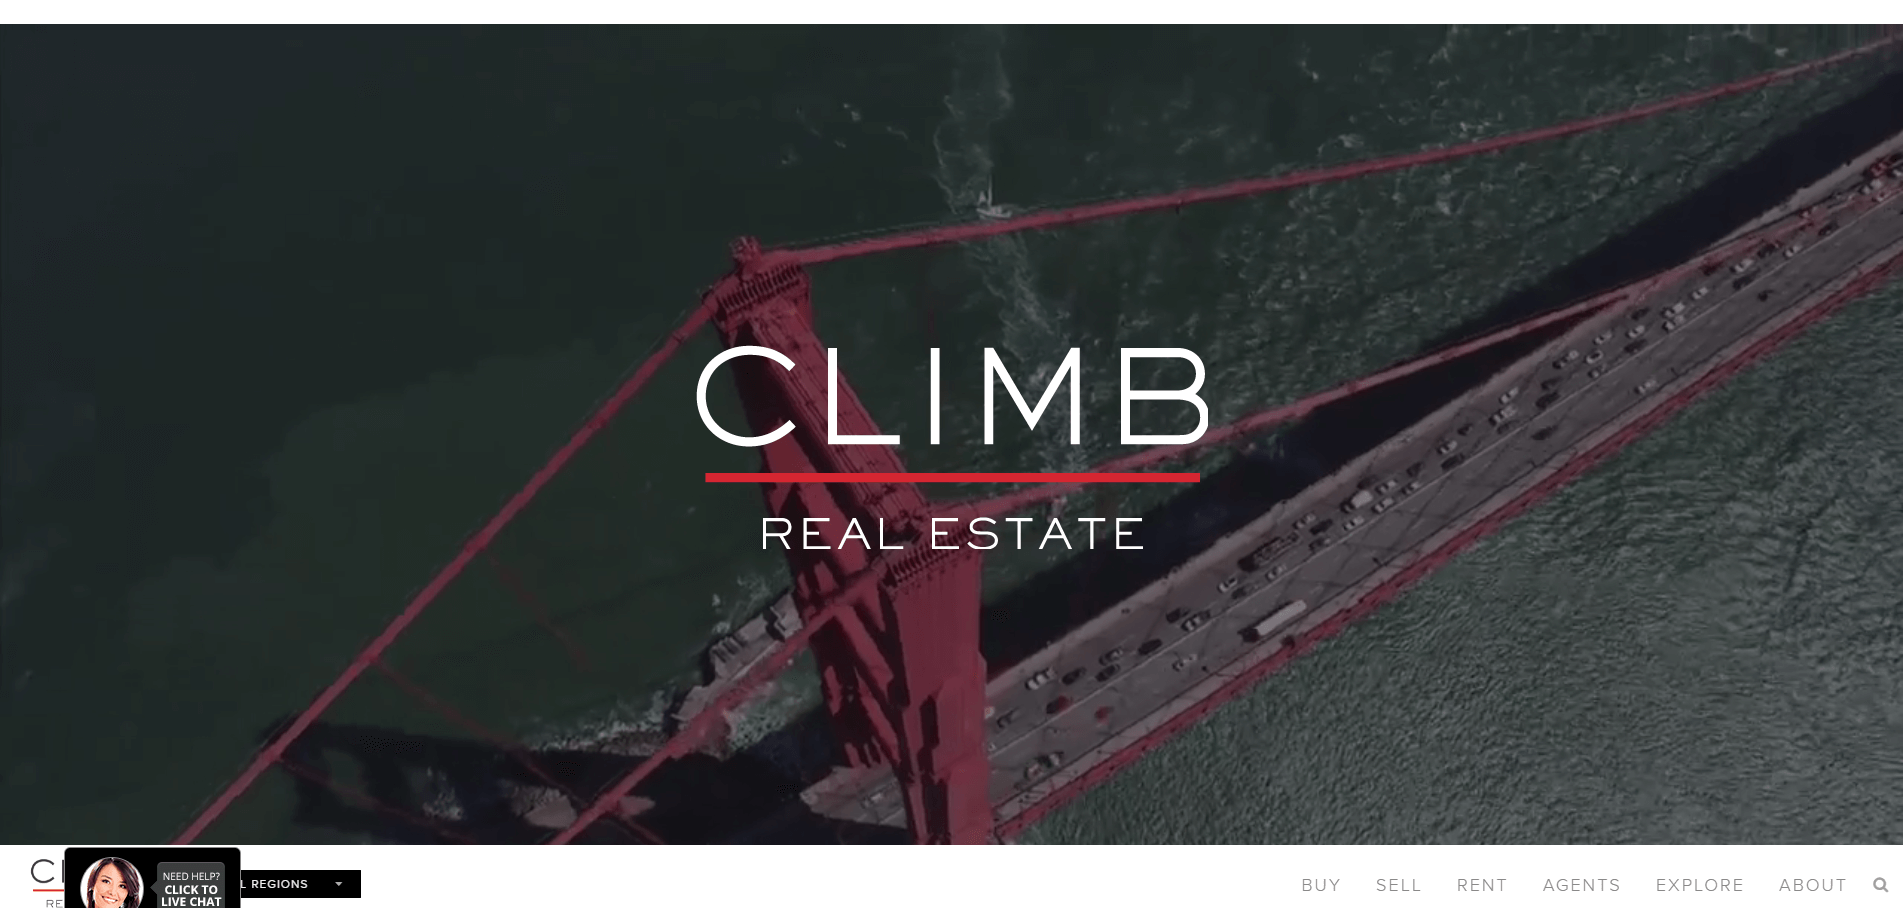  Awesome!  Here are 101 of the best real estate websites.  Each site is ranked 1-101 with a description and review.  Here's climbsf.com.  Who made the cut? 